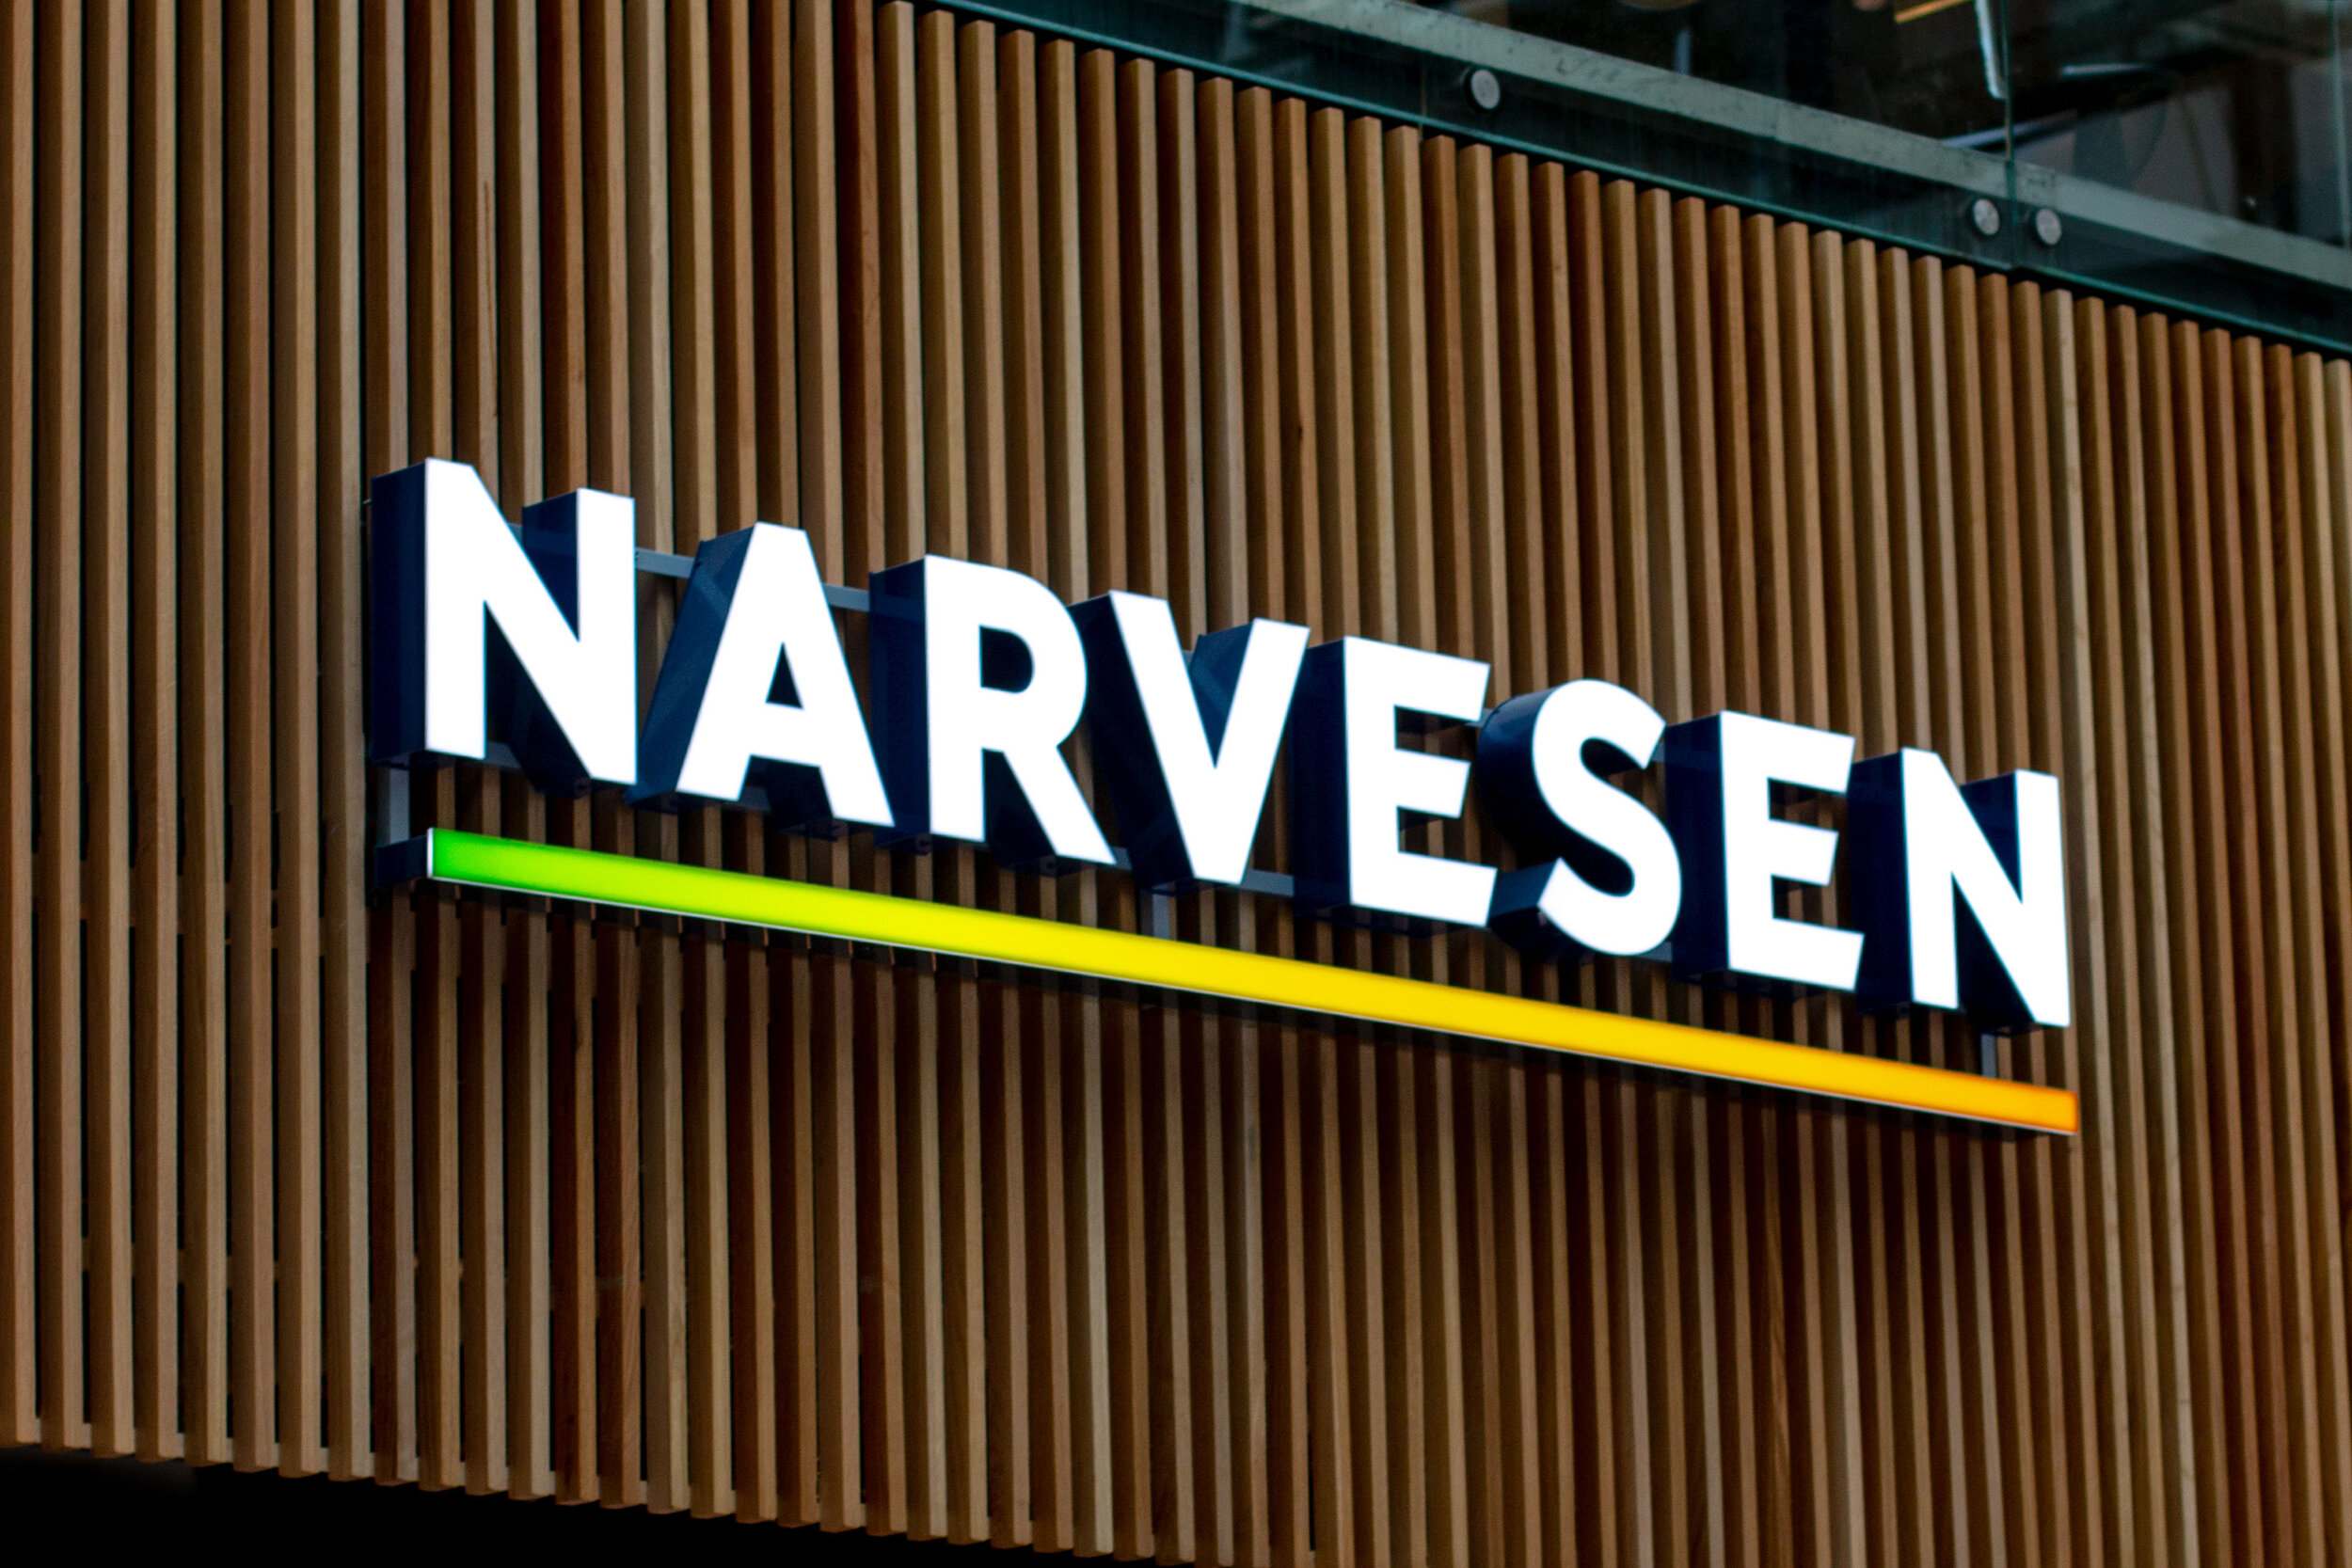 Narvesen has a wide range of shop solutions. They can build a clear brand through good design and that means that the design agency they work with must be professional.